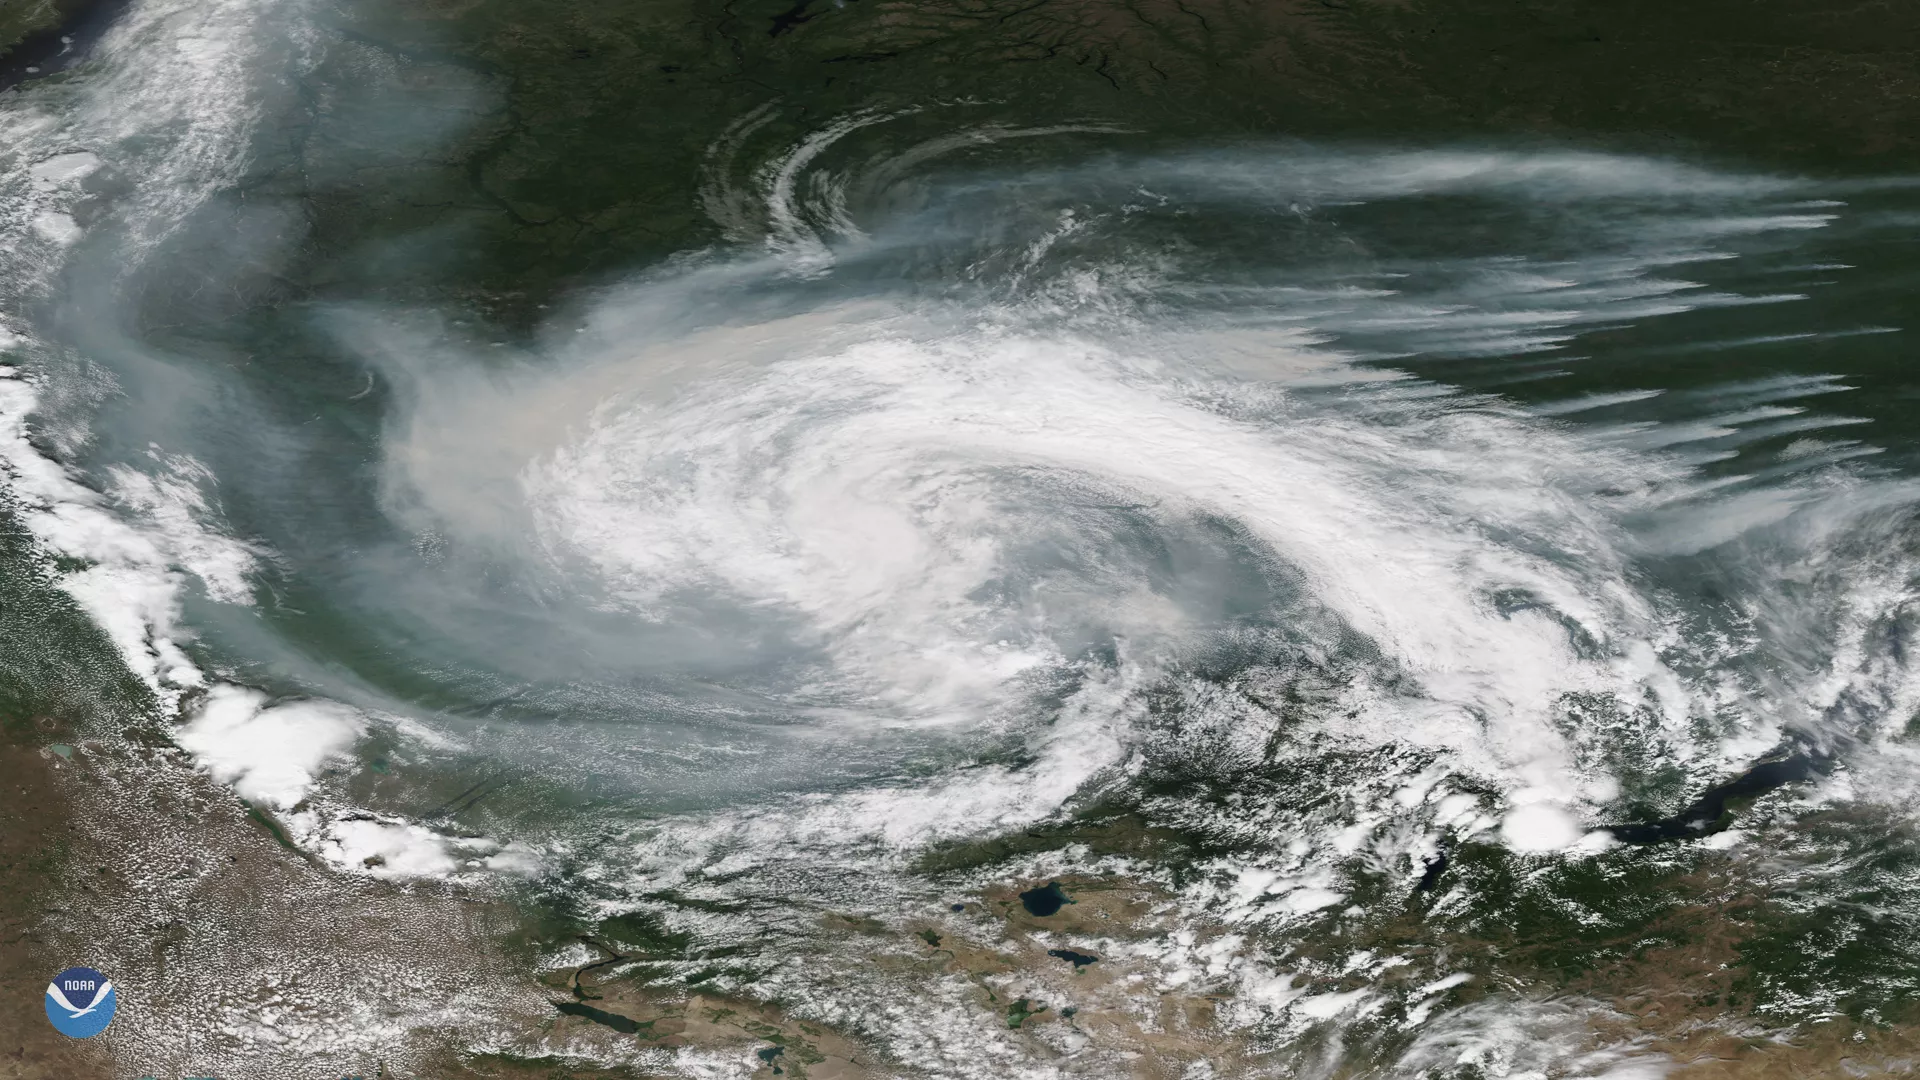 Smoke from active wildfires burning across northern Russia got caught in a low pressure system near the Verkhne-Tazovsky State Natural Reserve on July 21, 2019, as seen here by this True Color NOAA-20 satellite imagery.